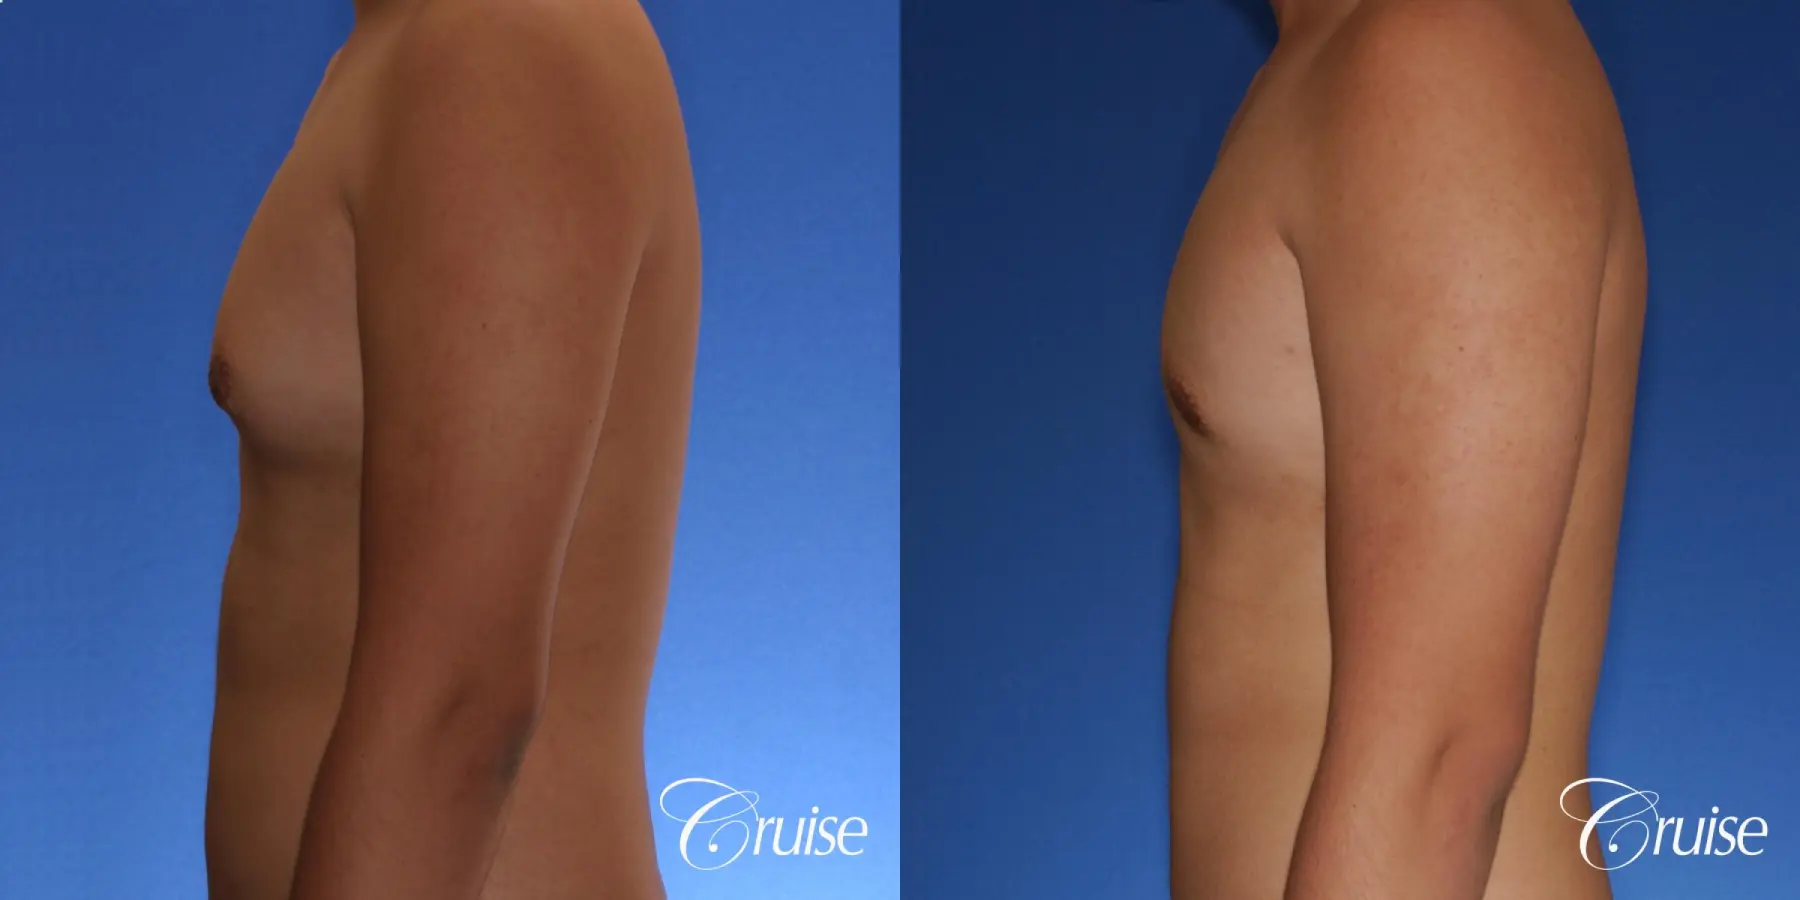 best gynecomastia surgery with plastic surgeon, Dr. Cruise - Before and After 2